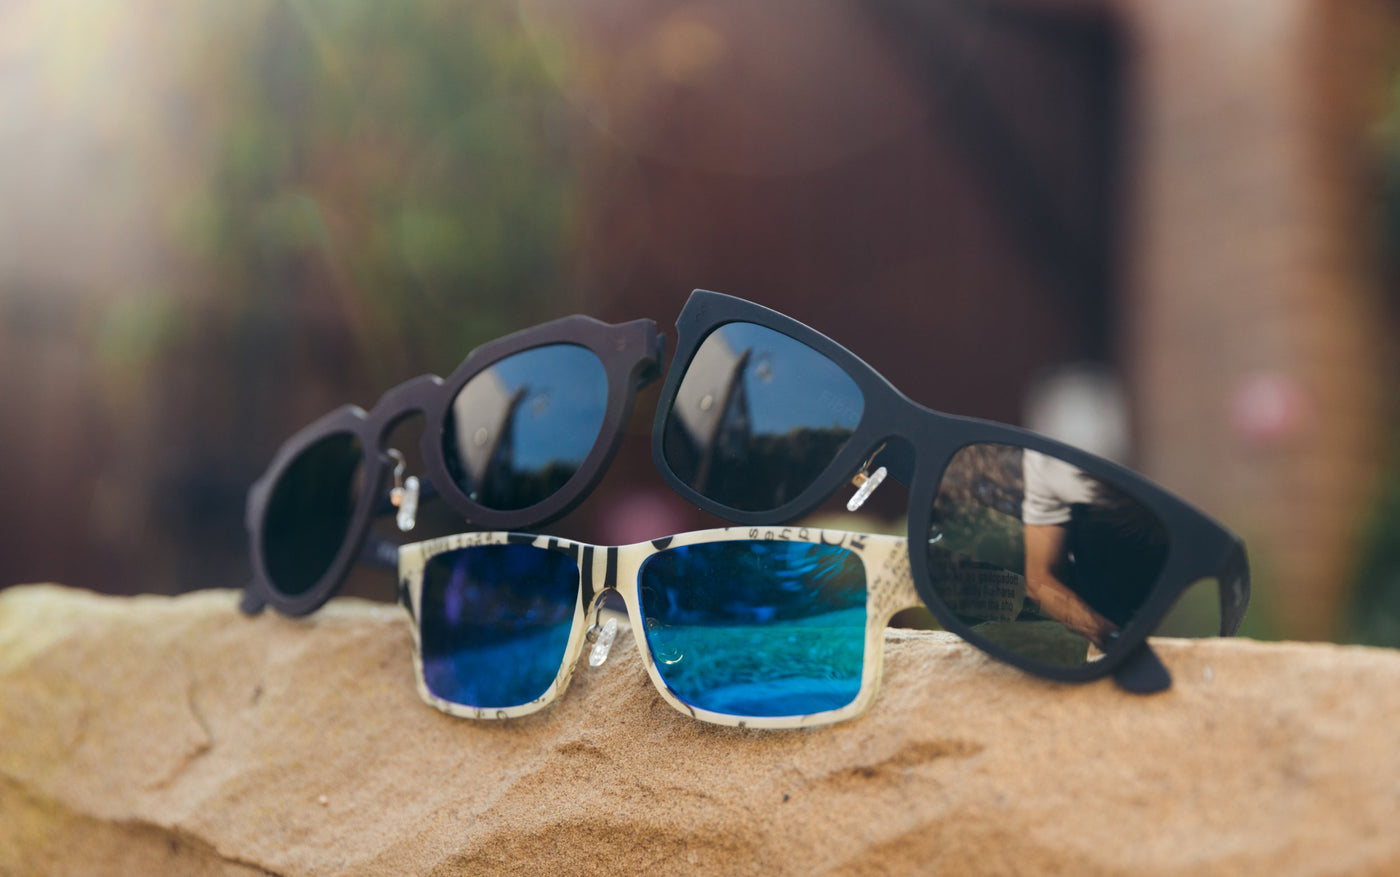 Recycleable and eco-friendly paper sunglasses.